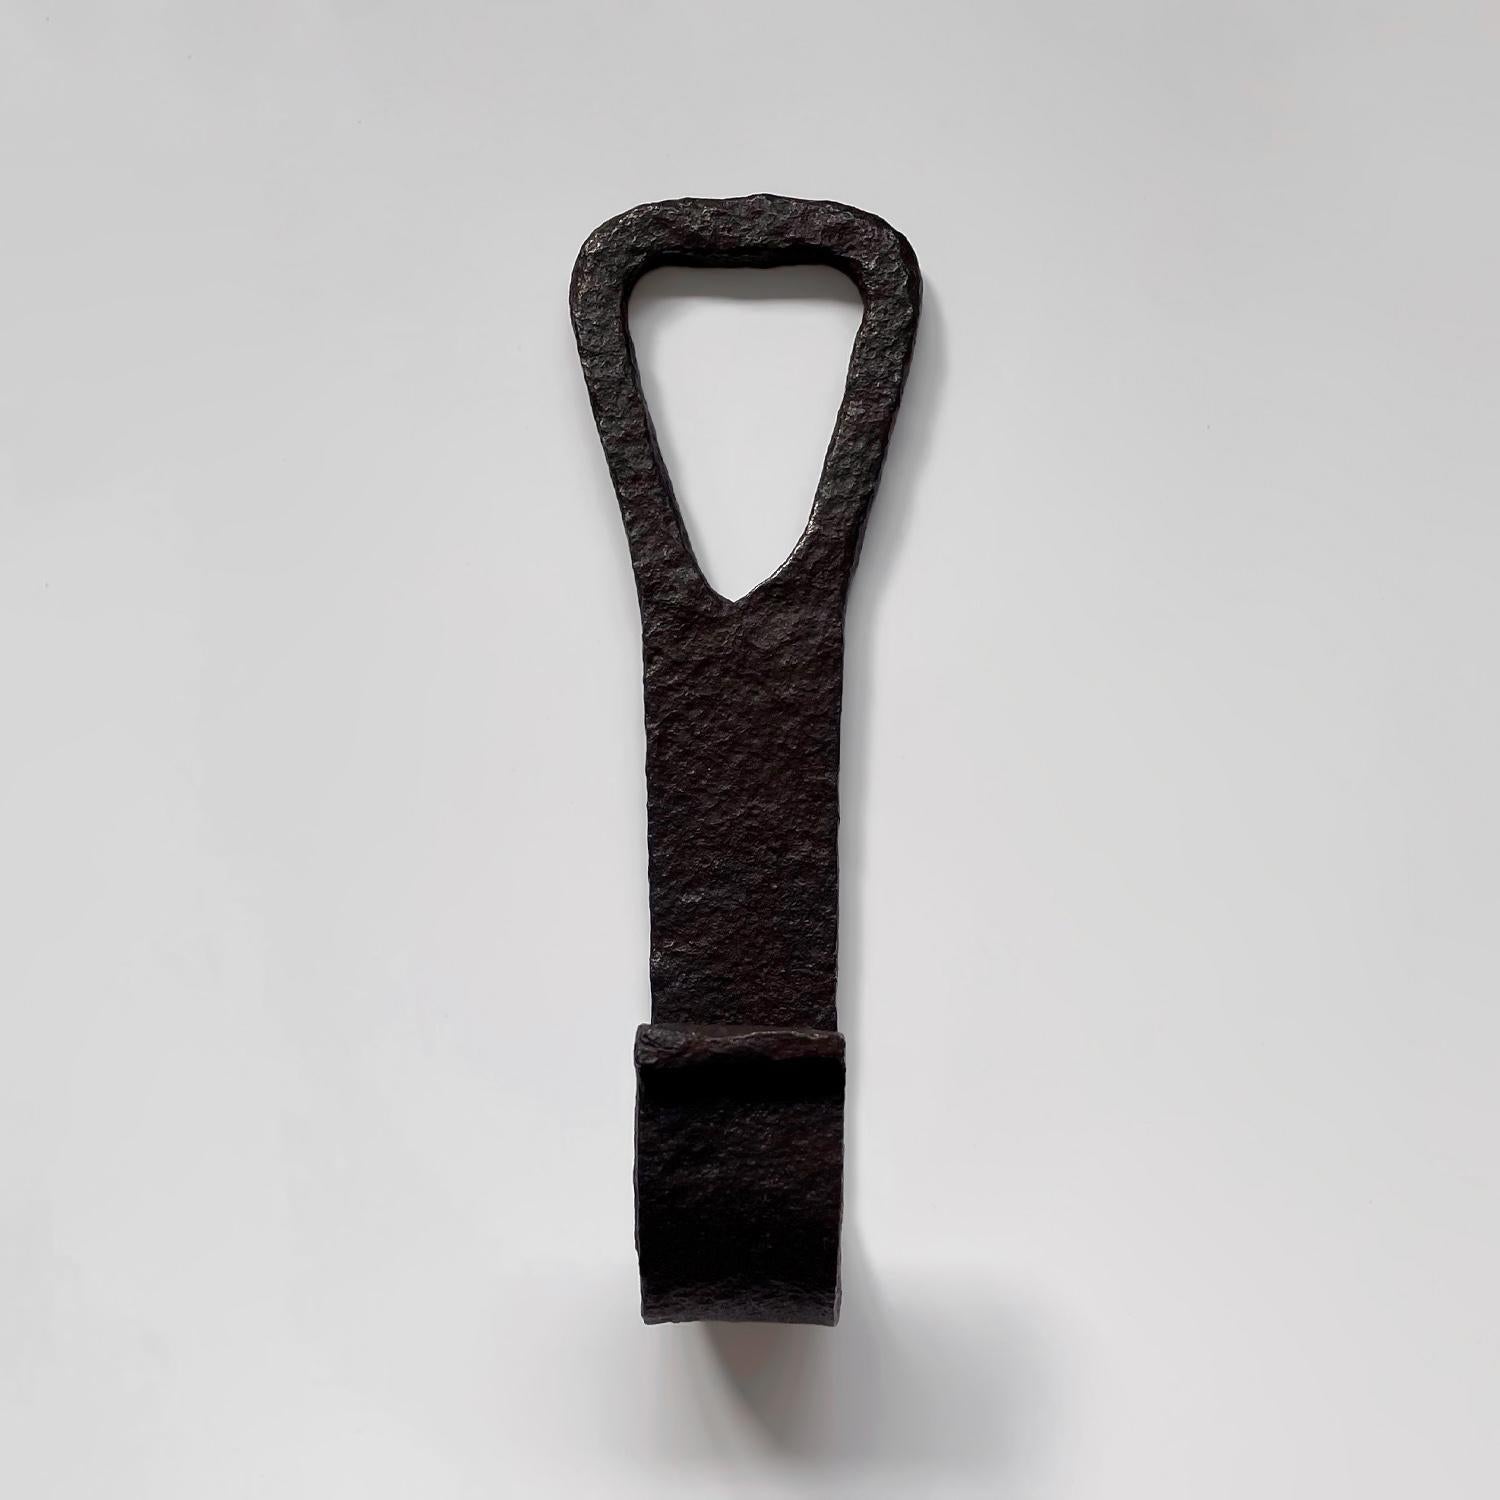 French Rustic Textured Iron Wall Hook For Sale 2